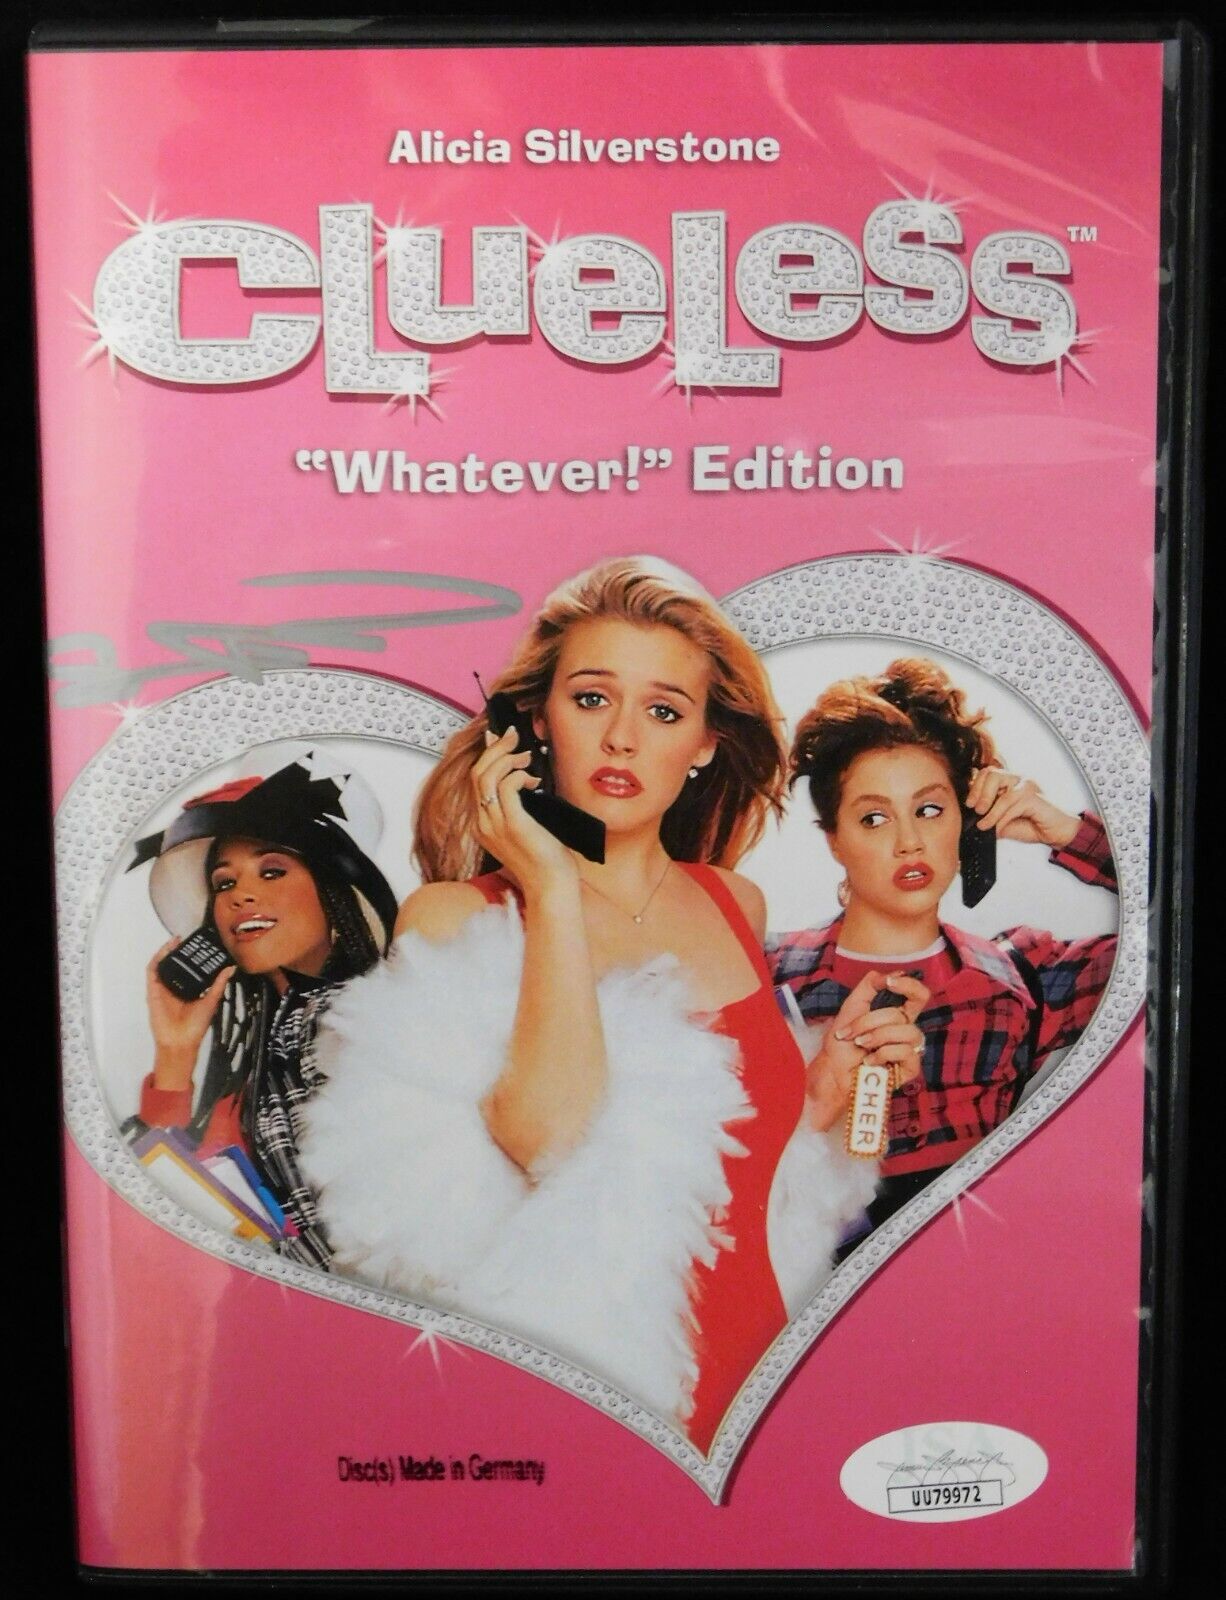 Stacey Dash Clueless Actress Signed Dvd Cover Jsa Authenticated